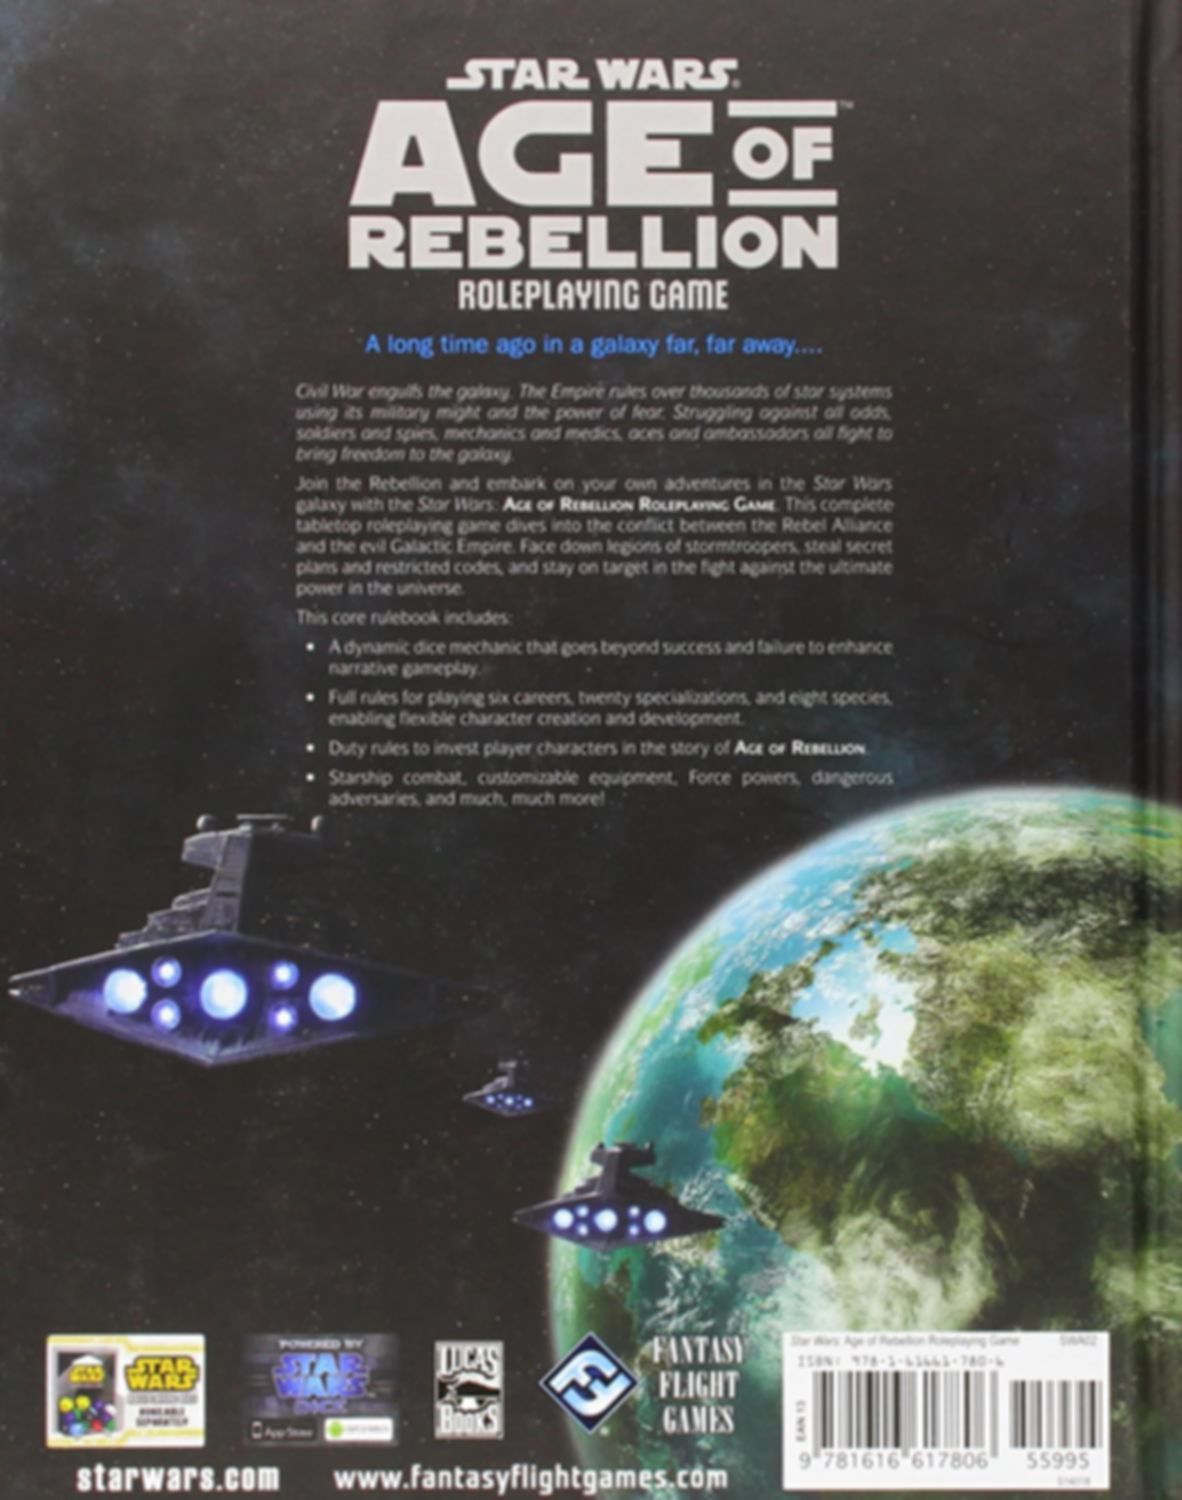 Star Wars Age of Rebellion RPG - Core Rulebook back of the box